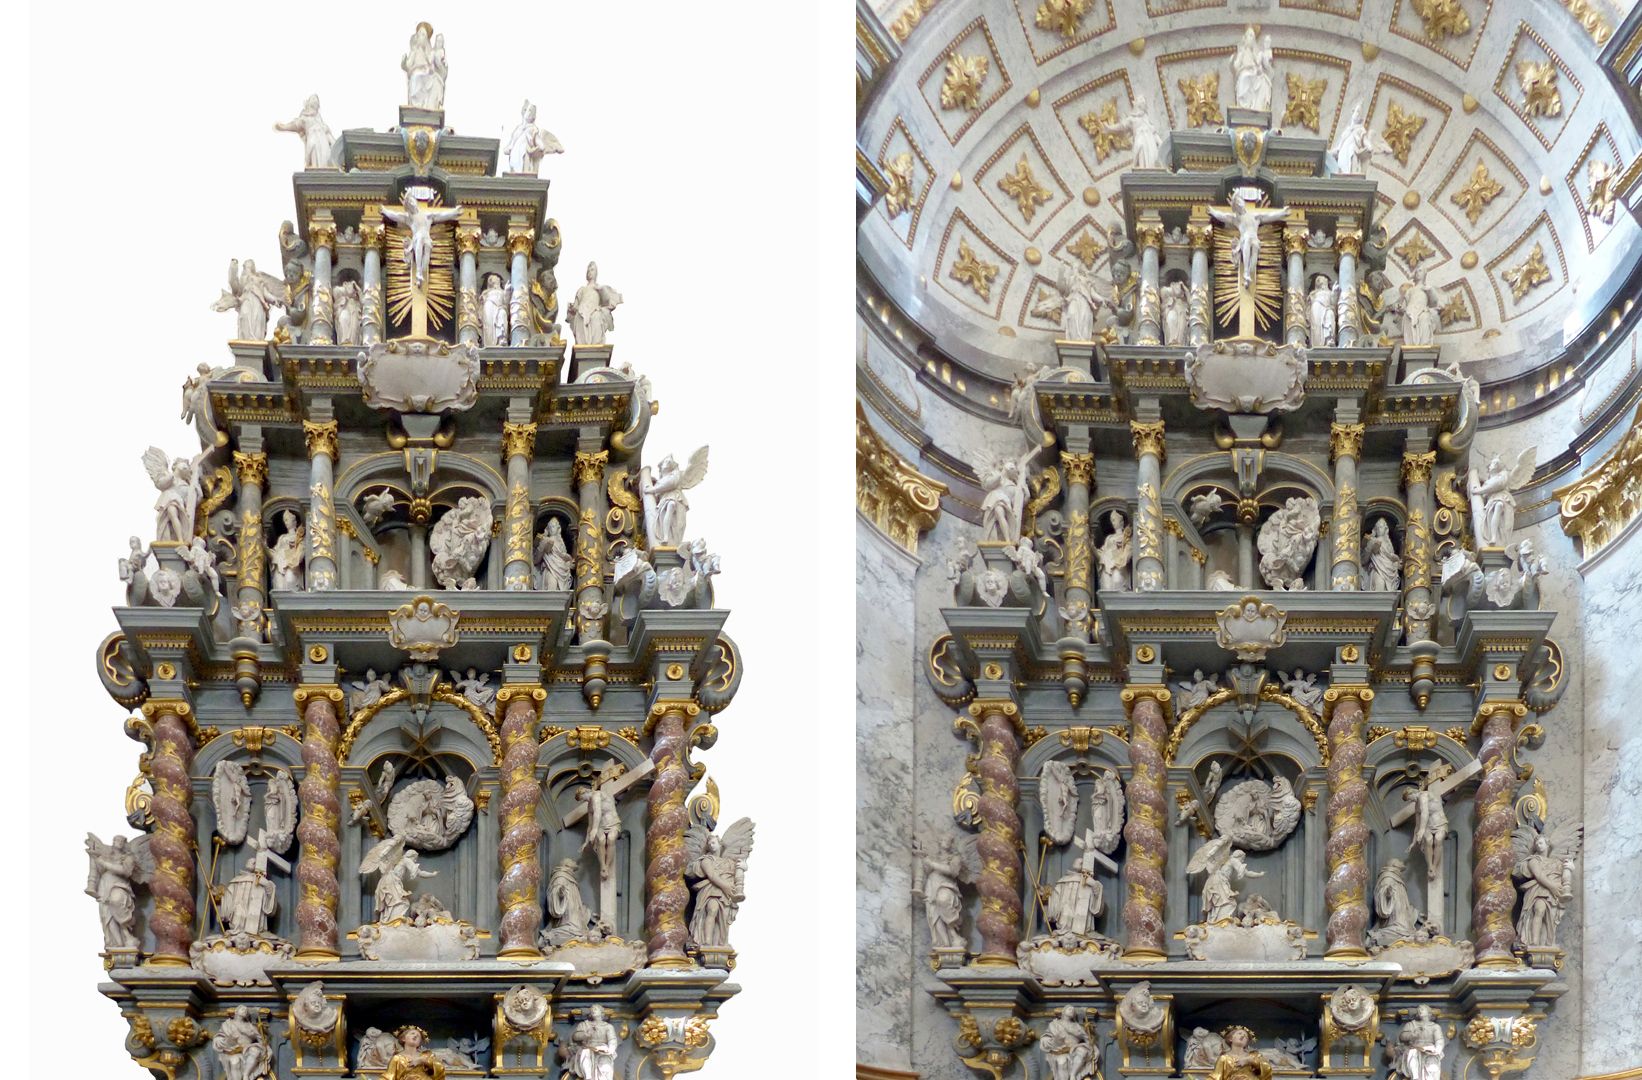 Altar of St. Bernard comparison with "exposed" altar